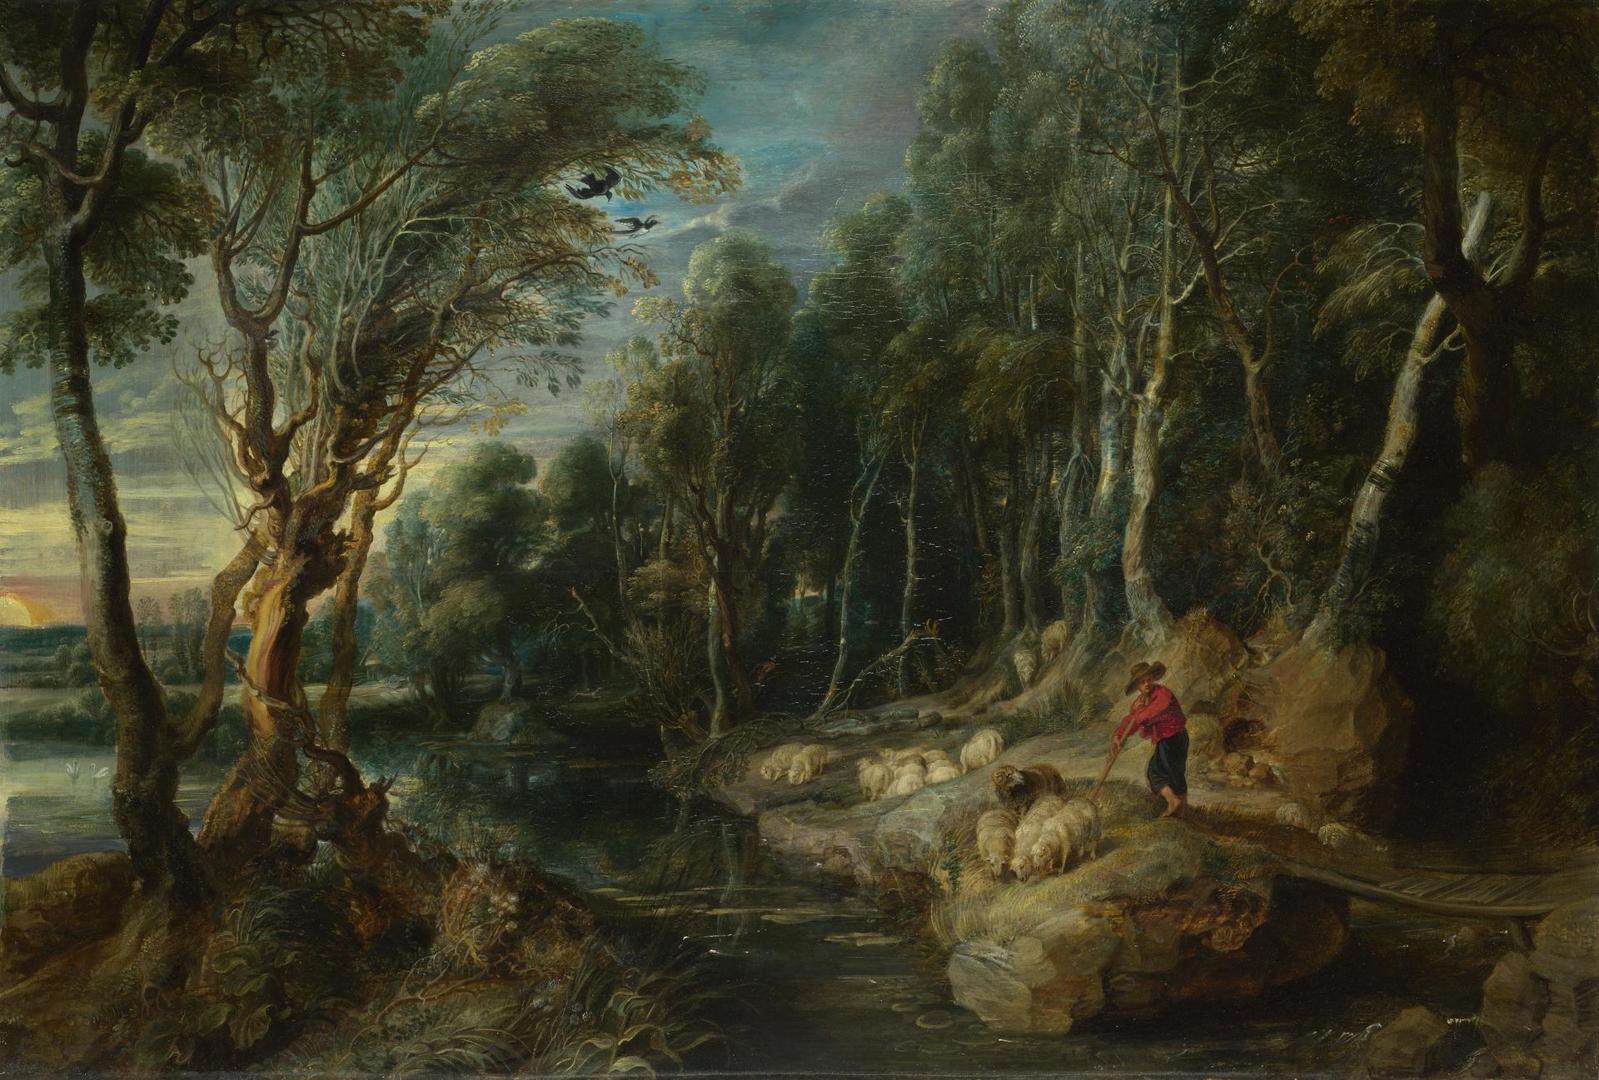 A Shepherd with his Flock in a Woody Landscape by Peter Paul Rubens